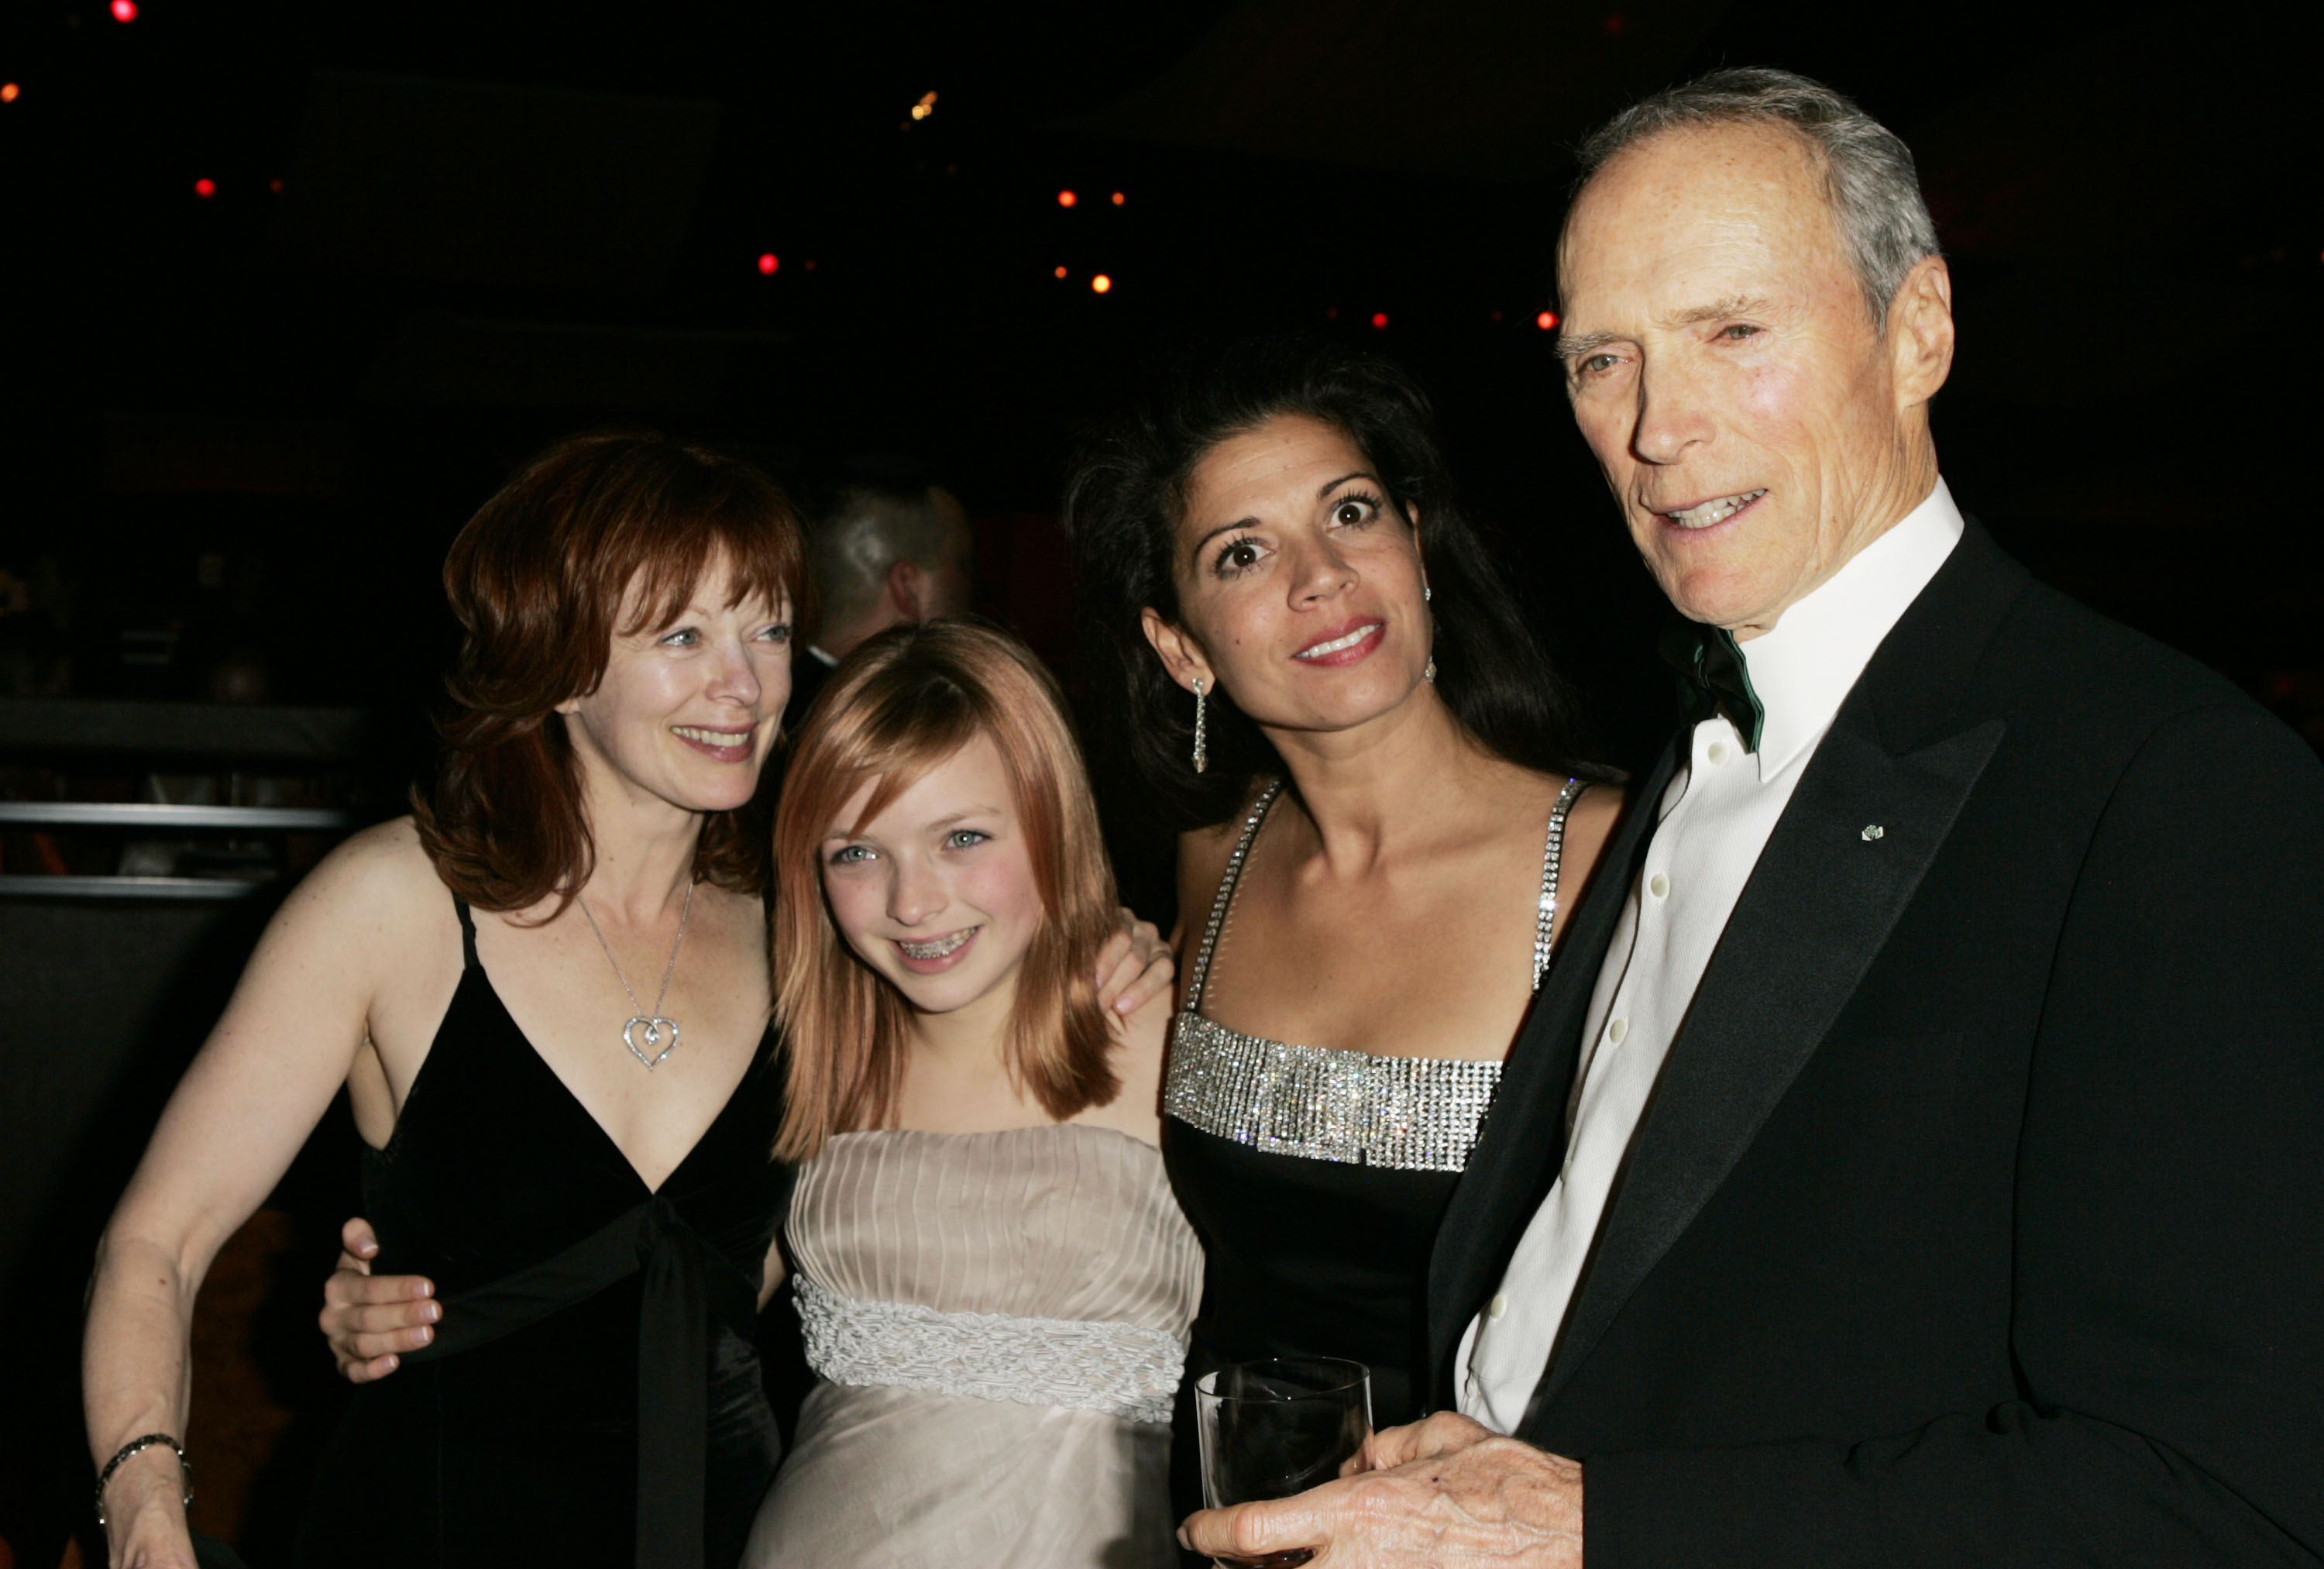 Frances Fisher, Francesca Fisher-Eastwood, Dina Eastwood, and Clint Eastwood at the 77th Annual Academy Awards Governors Ball on February 27, 2005. | Source: Getty Images